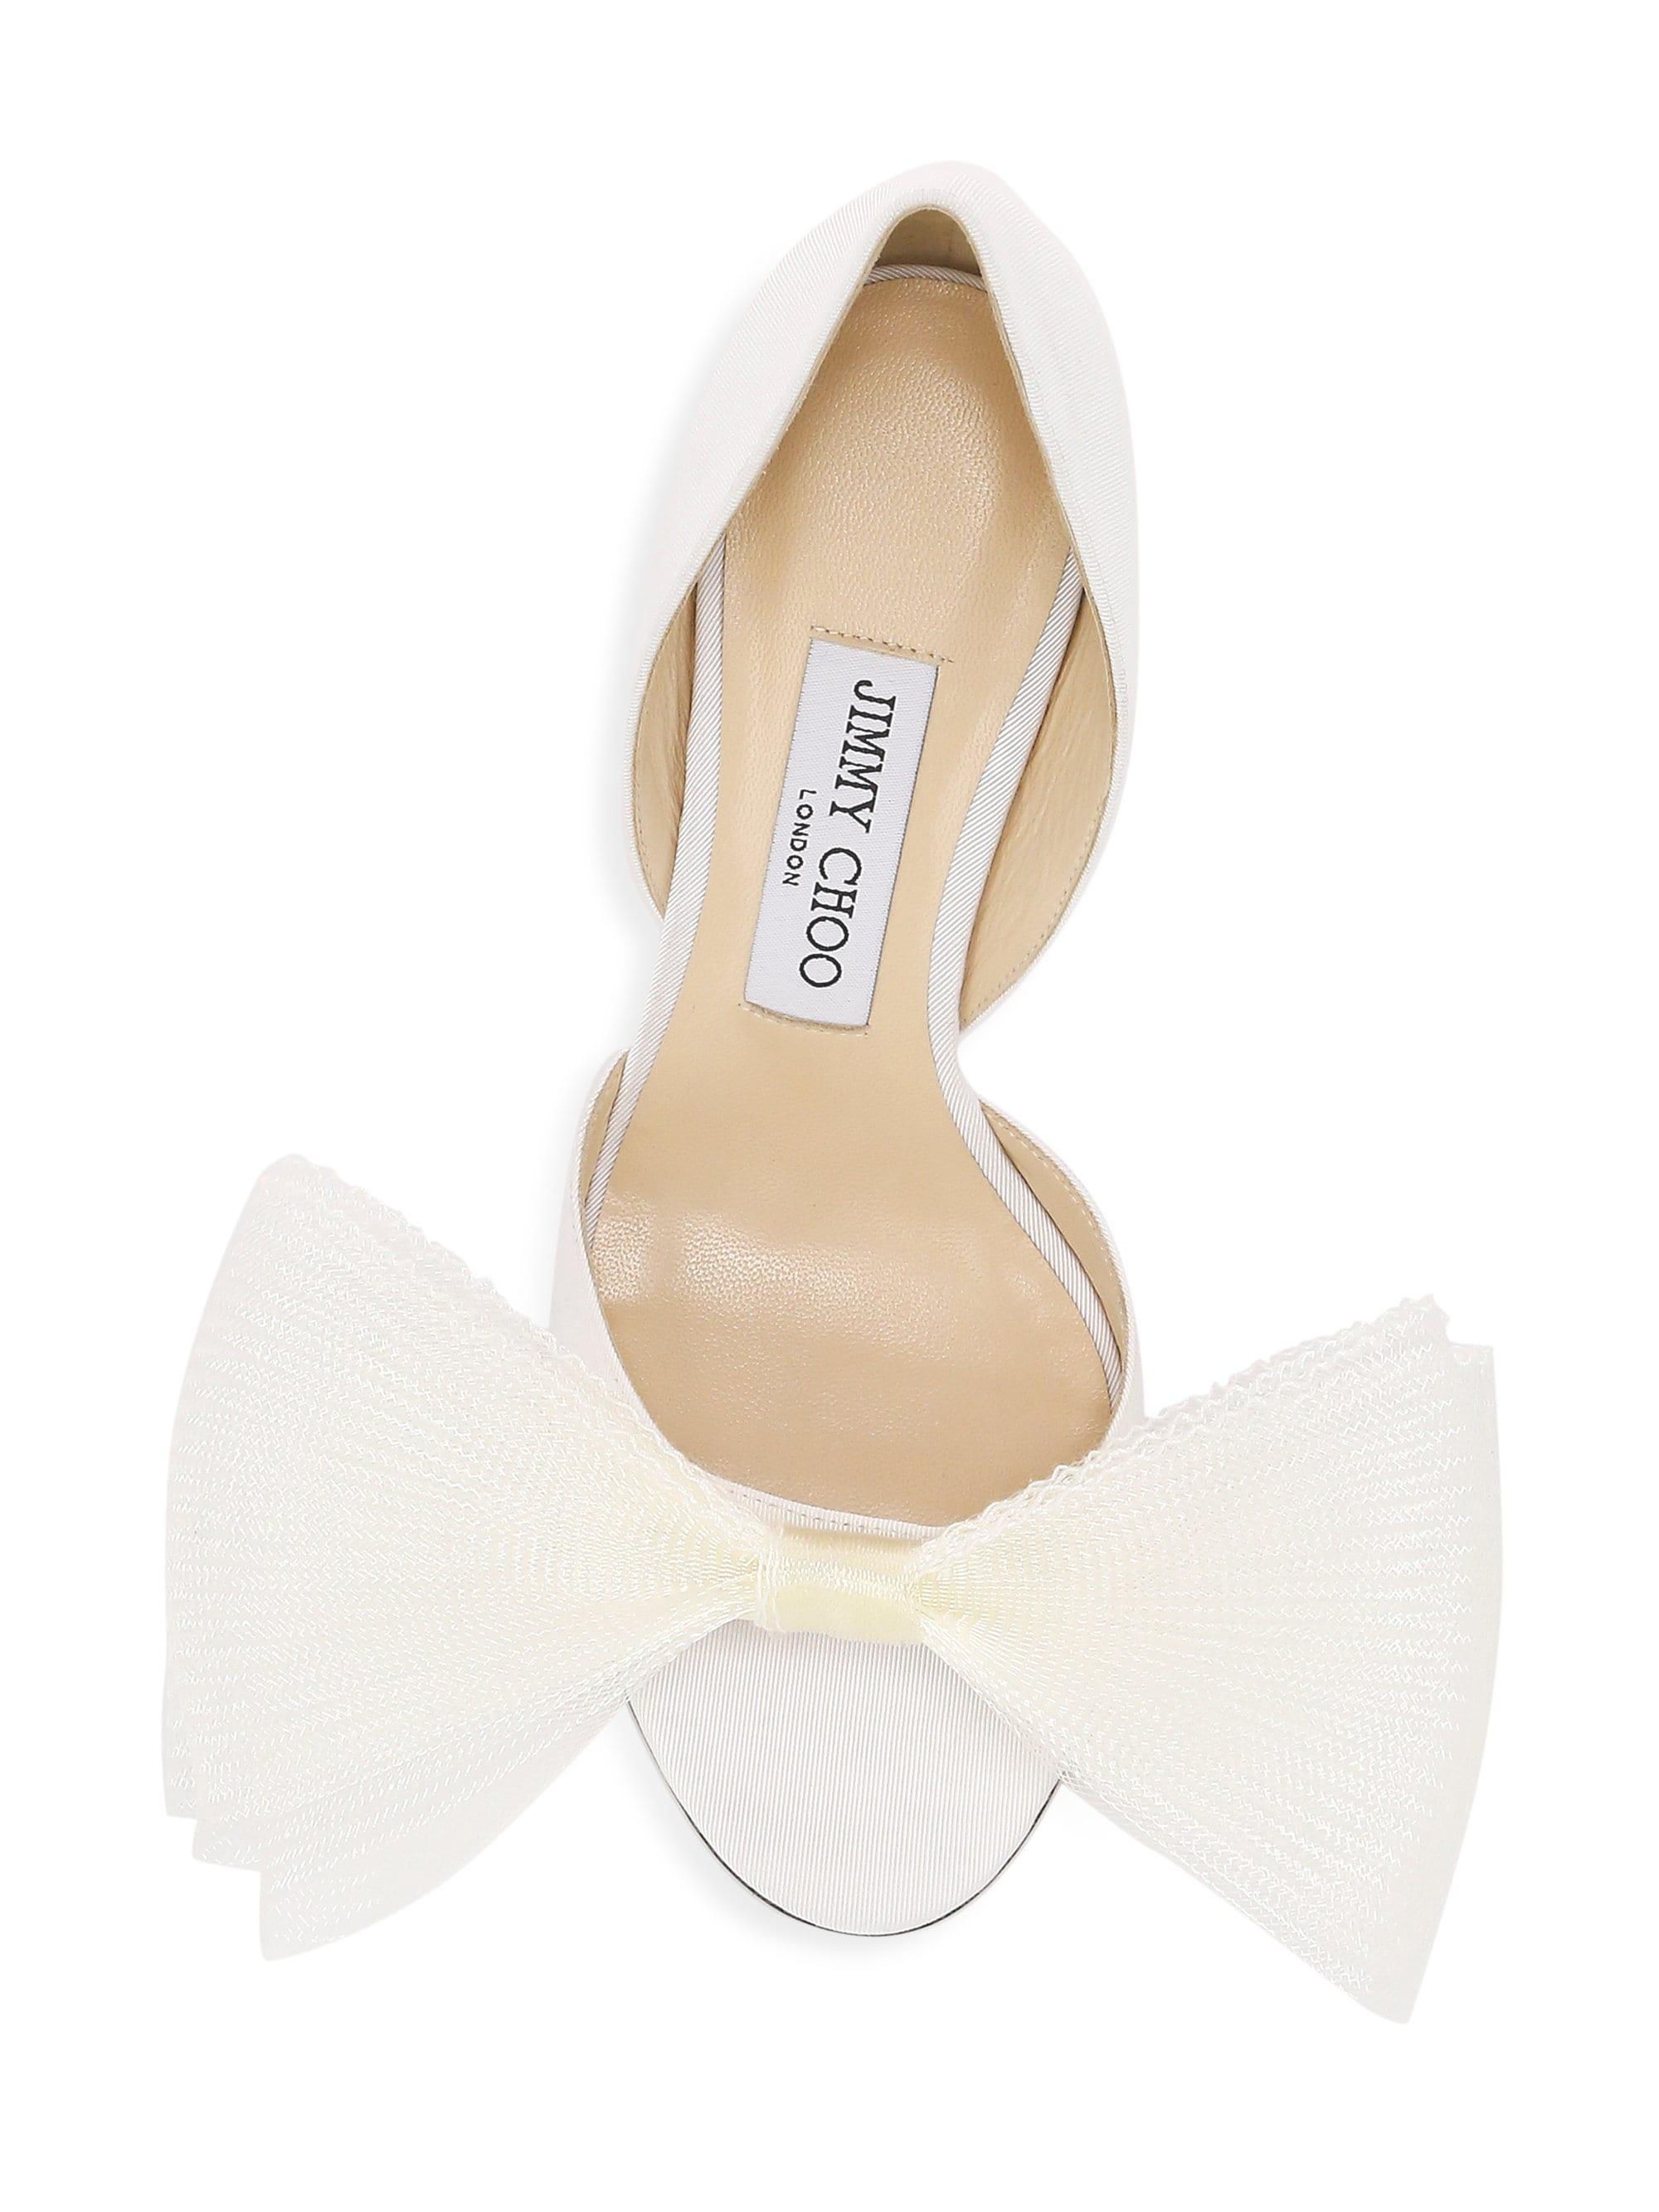 Jimmy Choo Adesu Tulle Bow Pumps in White - Lyst